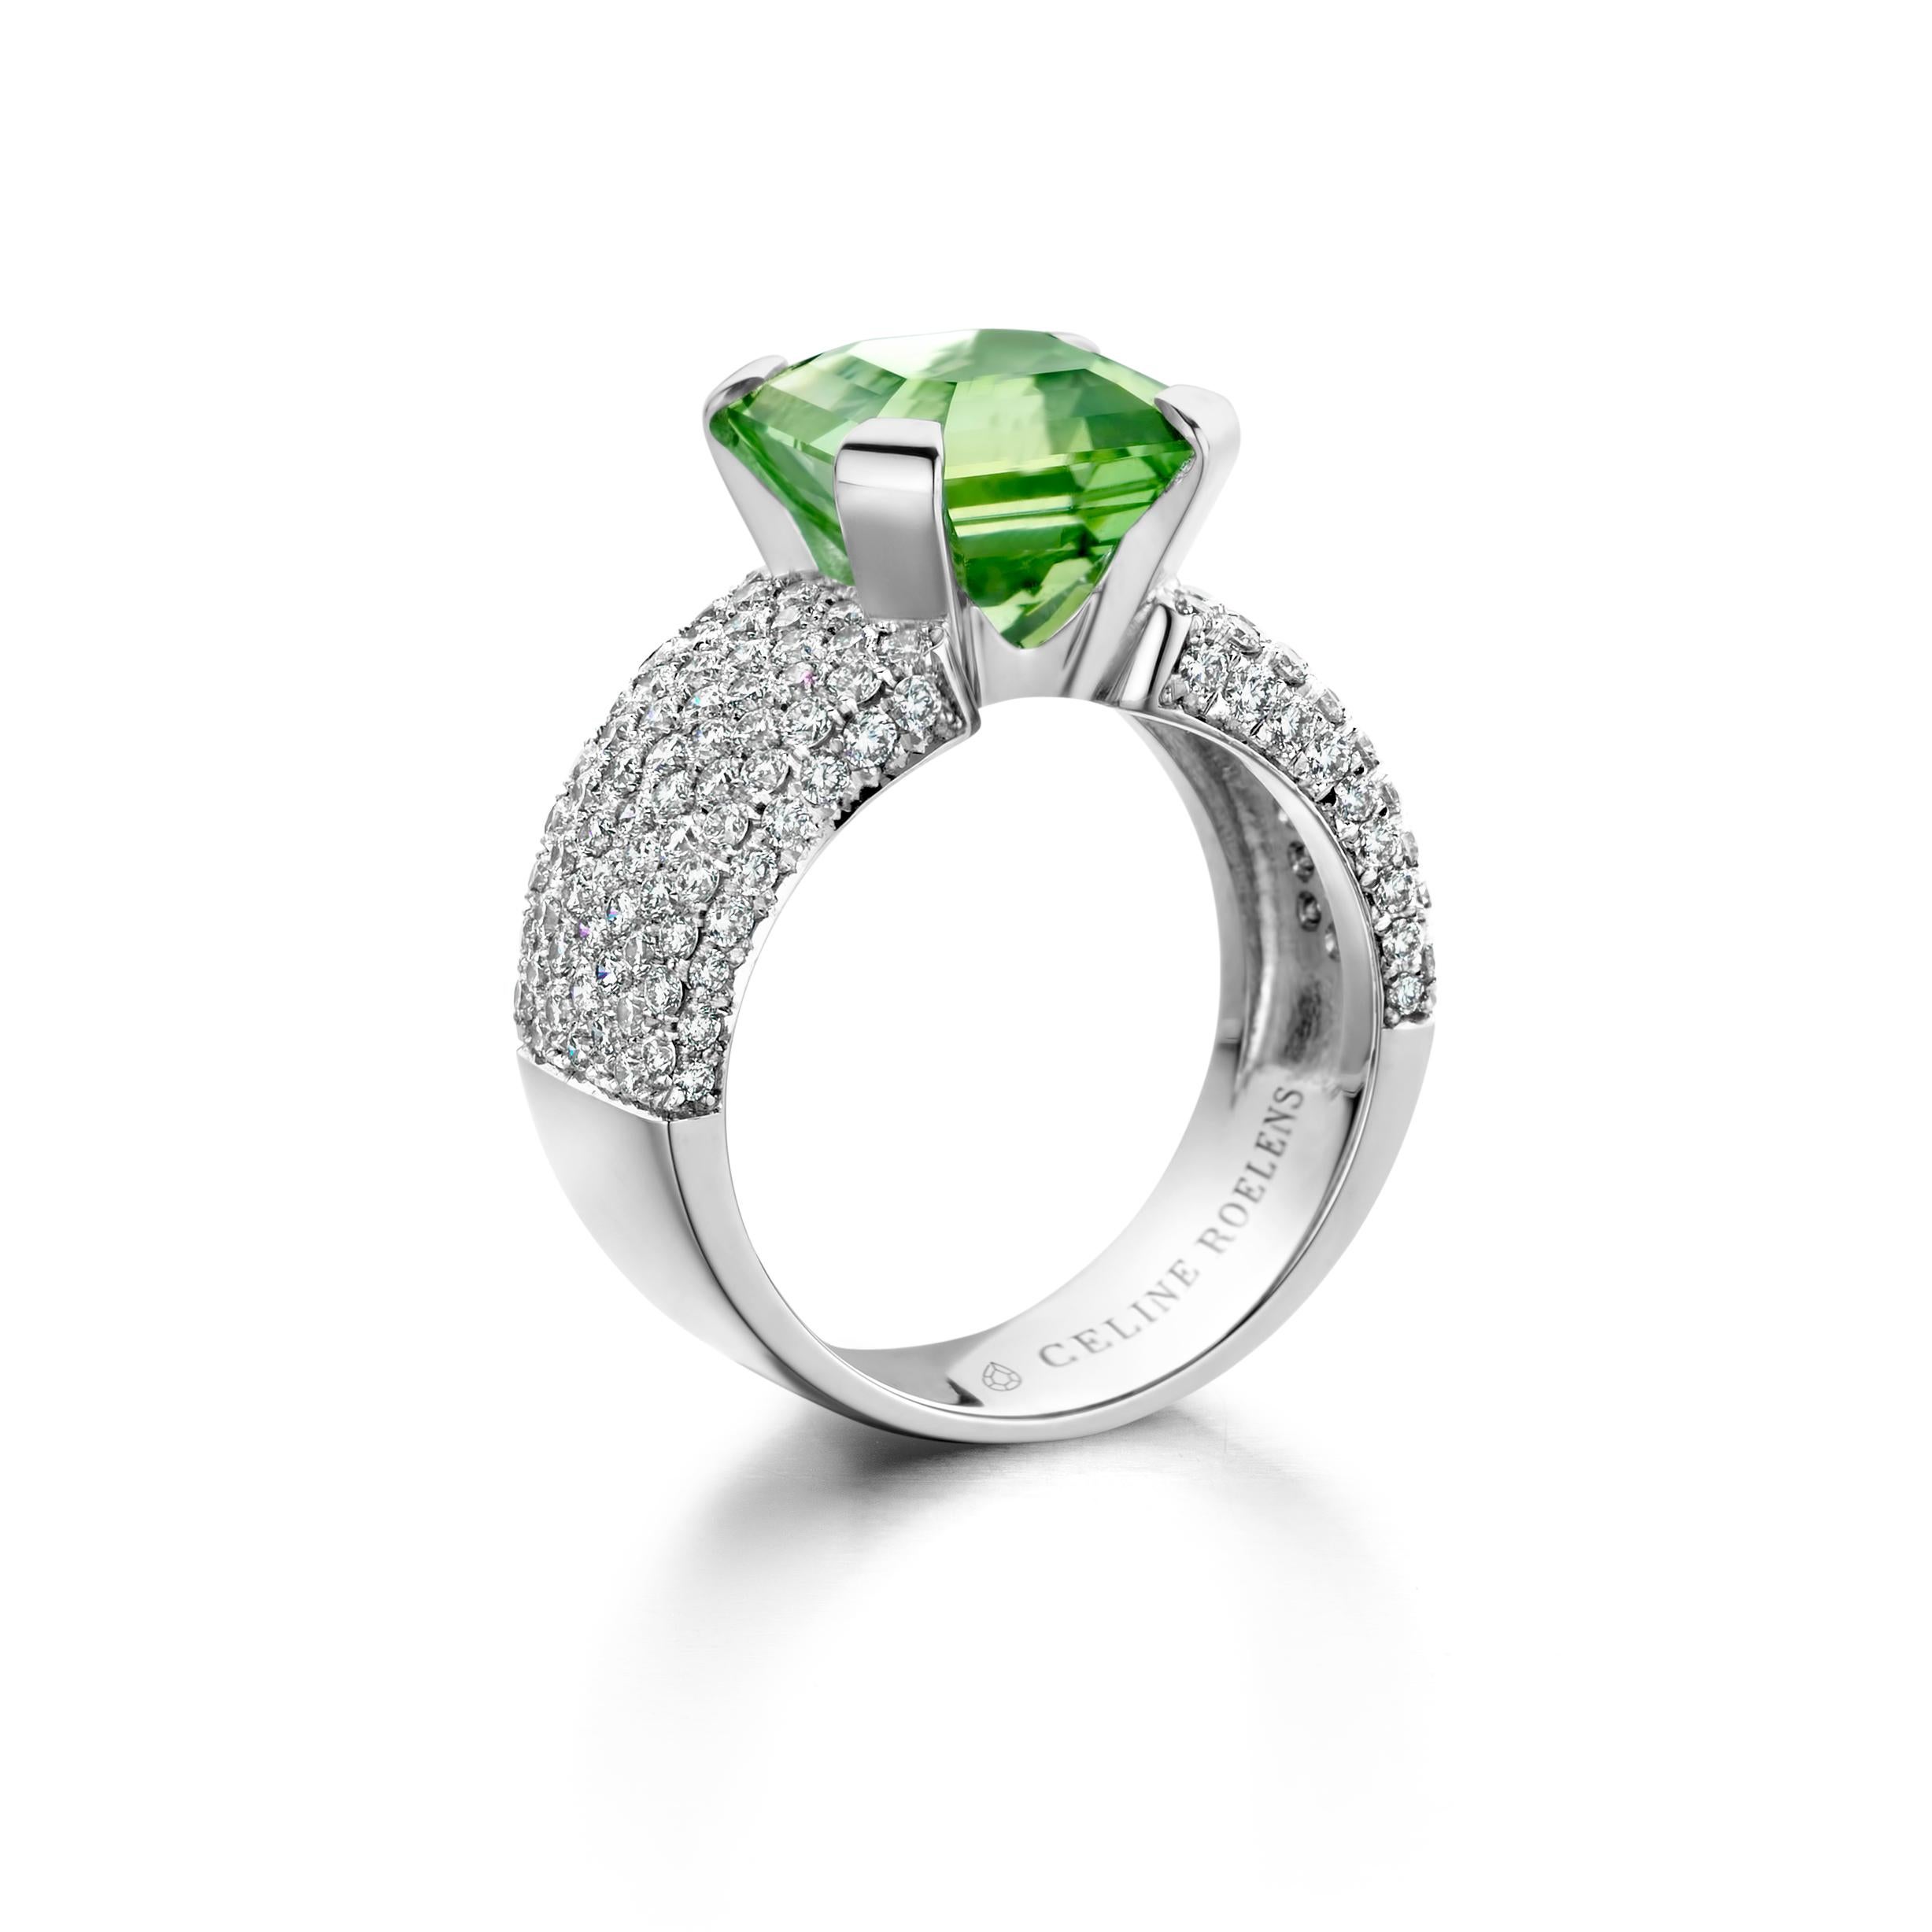 One of a kind ring (13.58g) in 18 Karat palladium white gold set with 1 natural, eye clean asscher cut green tourmaline of 5.8 Carat. The ring is set with the finest loop clean diamonds brilliant cut 1.62 Carat (D quality).

Celine Roelens, a